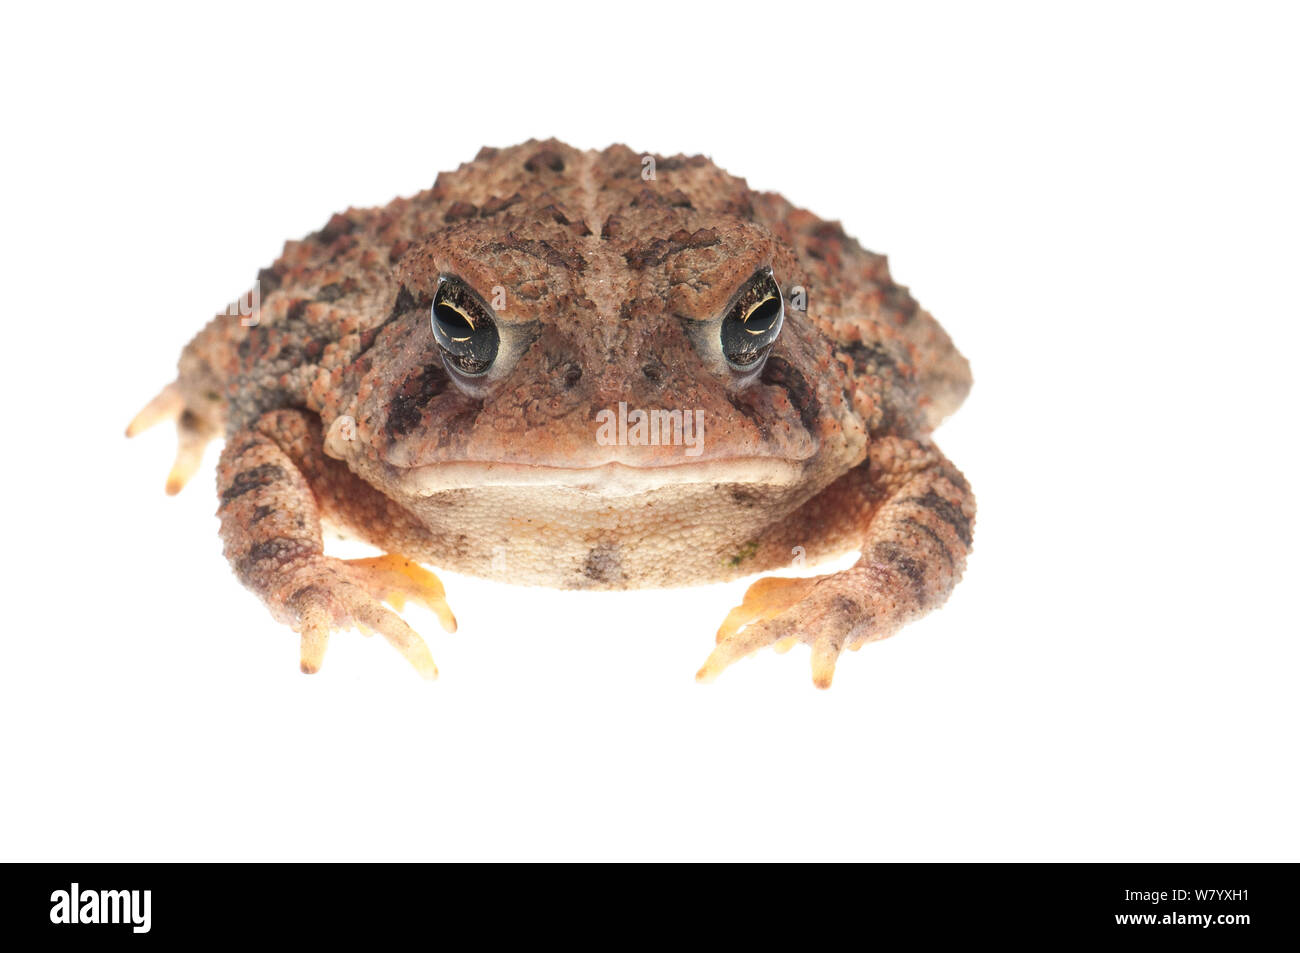 Fowler&# 39;s toad Anaxyrus fowleri) (Oxford, Mississippi, USA, avril. Projet d'Meetyourneighbors.net Banque D'Images